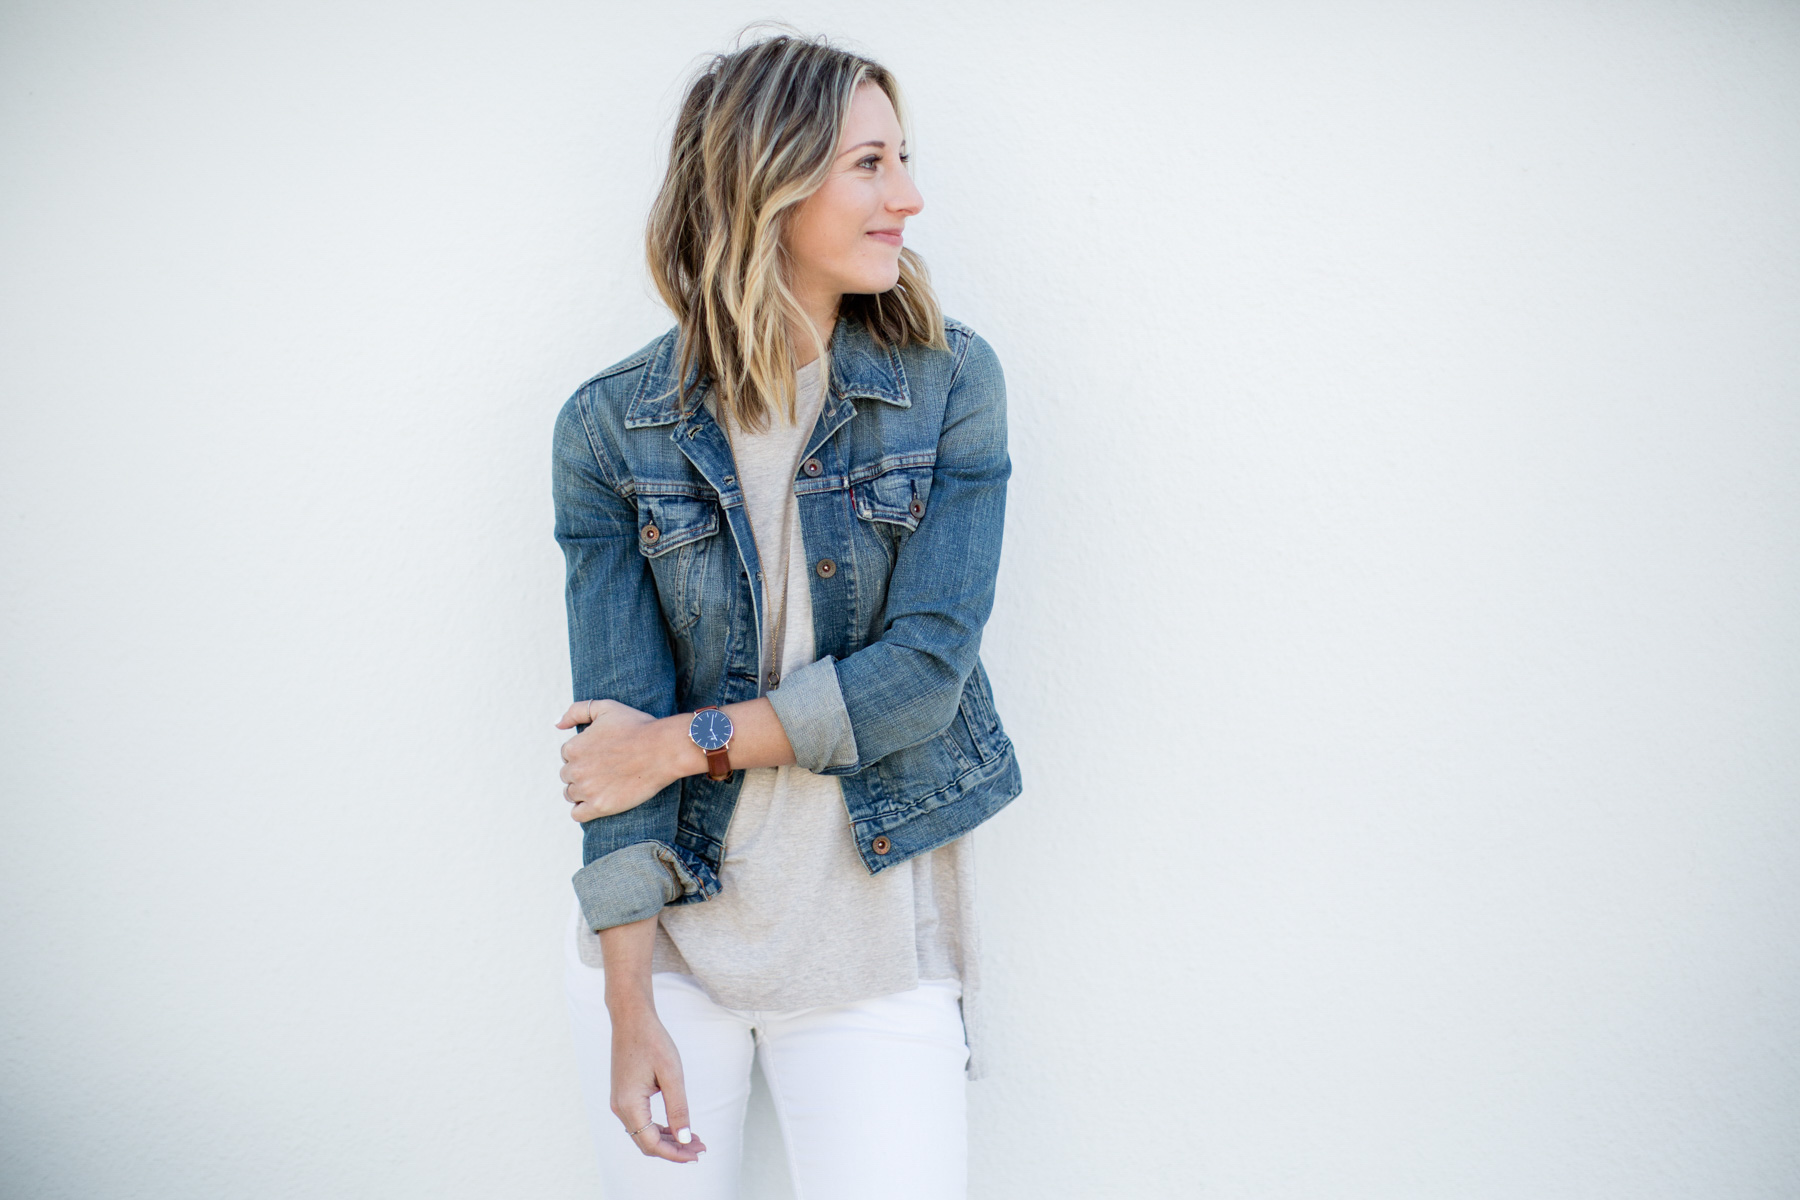 basic outfits with white jeans, tee shirt, and denim jacket